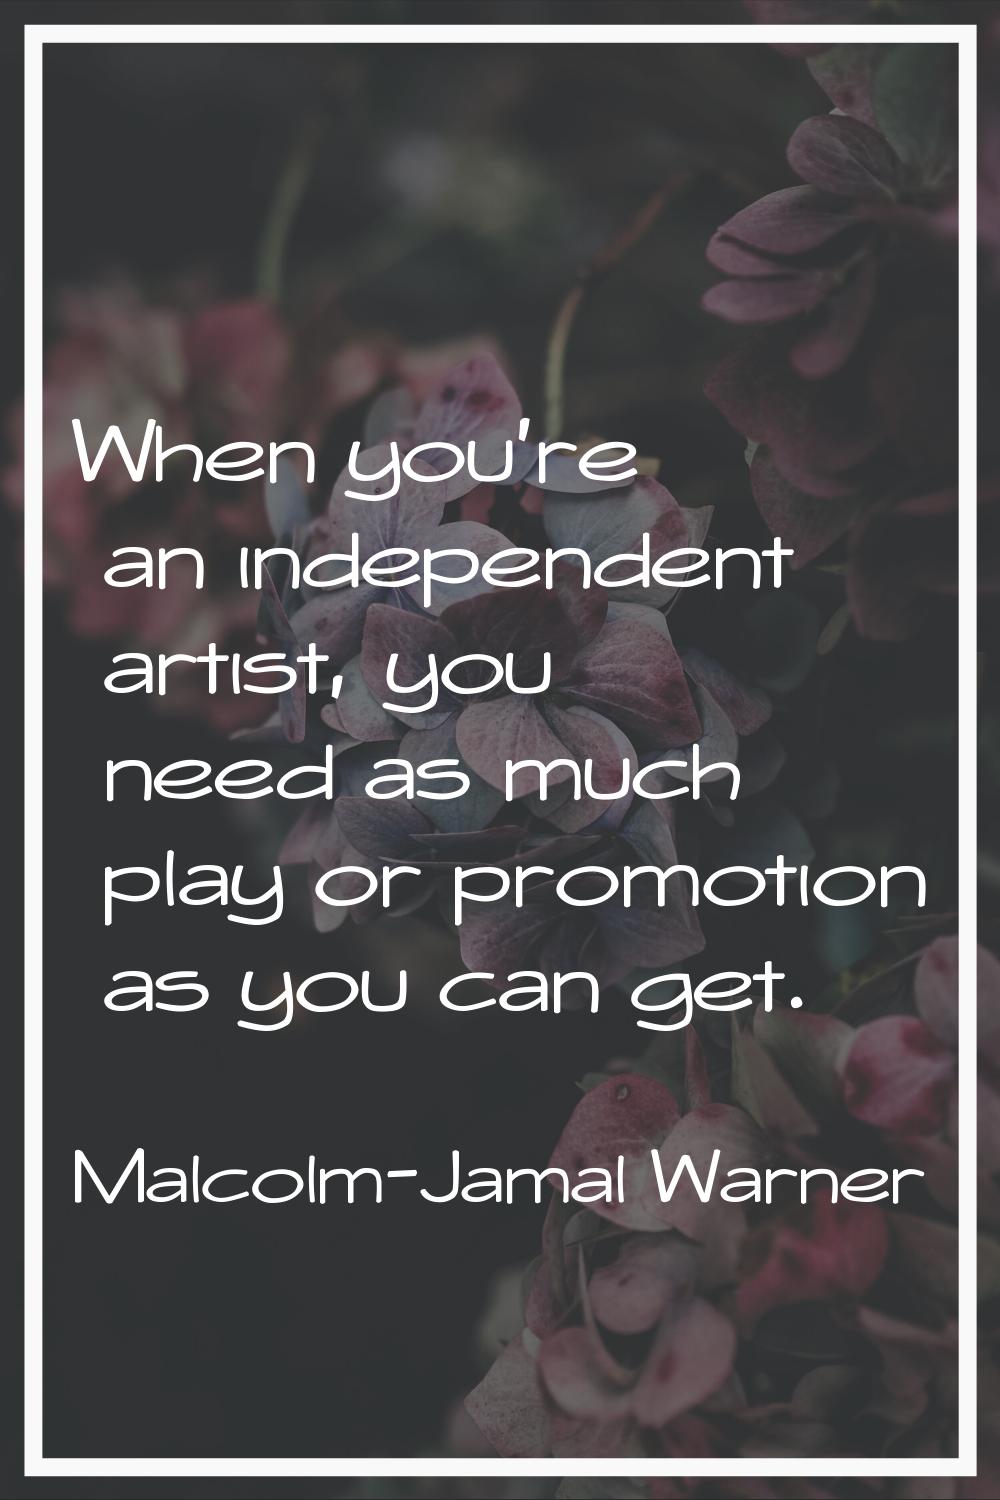 When you're an independent artist, you need as much play or promotion as you can get.